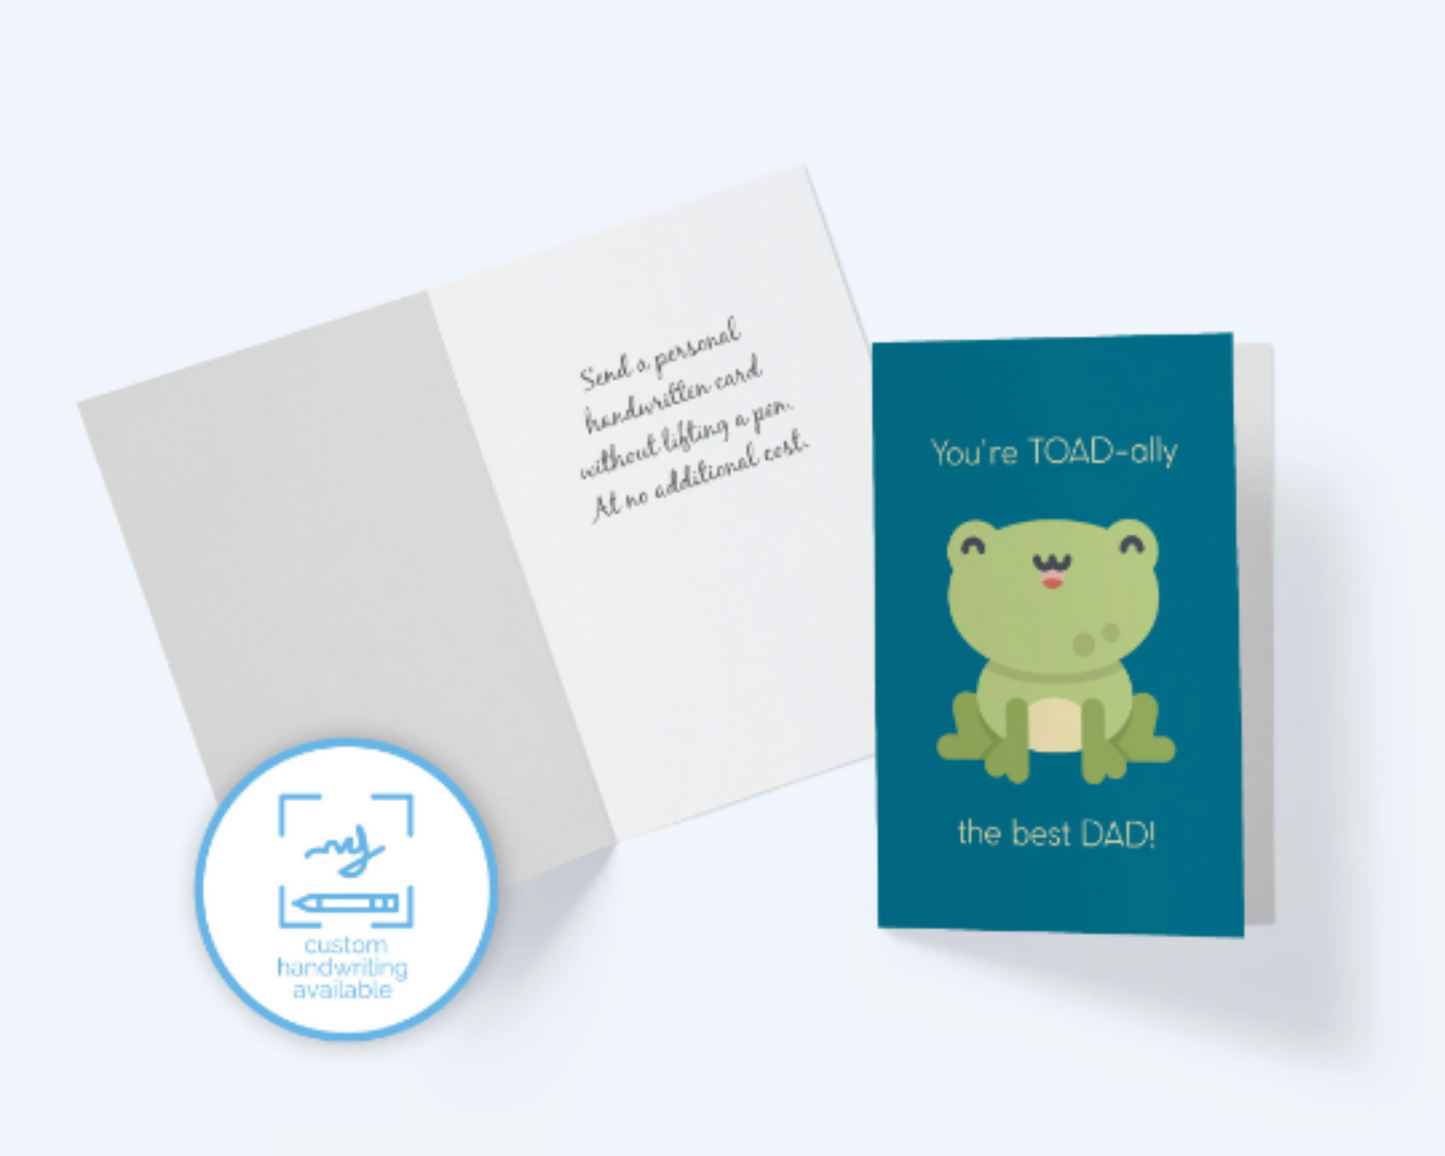 You're Toad-ally The Best Dad - Father's Day Card - Dad Jokes Greeting Card